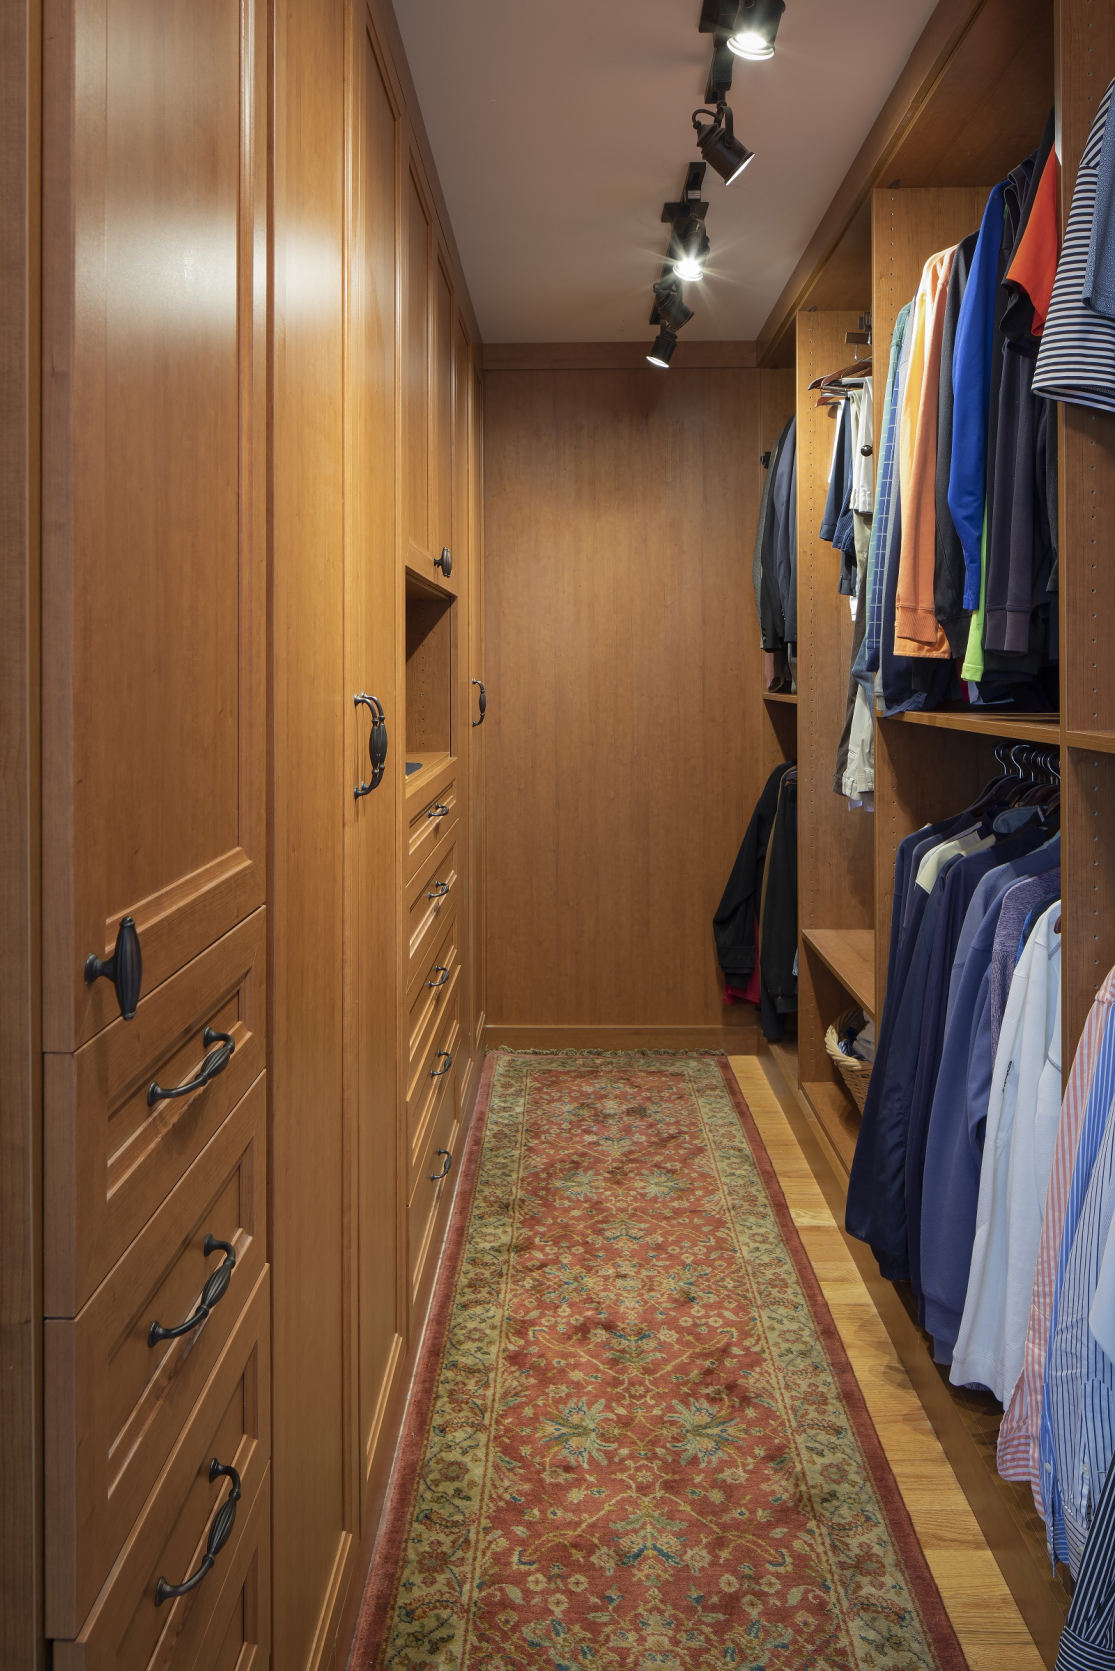 How to Organize Your Closet Without Spending Money